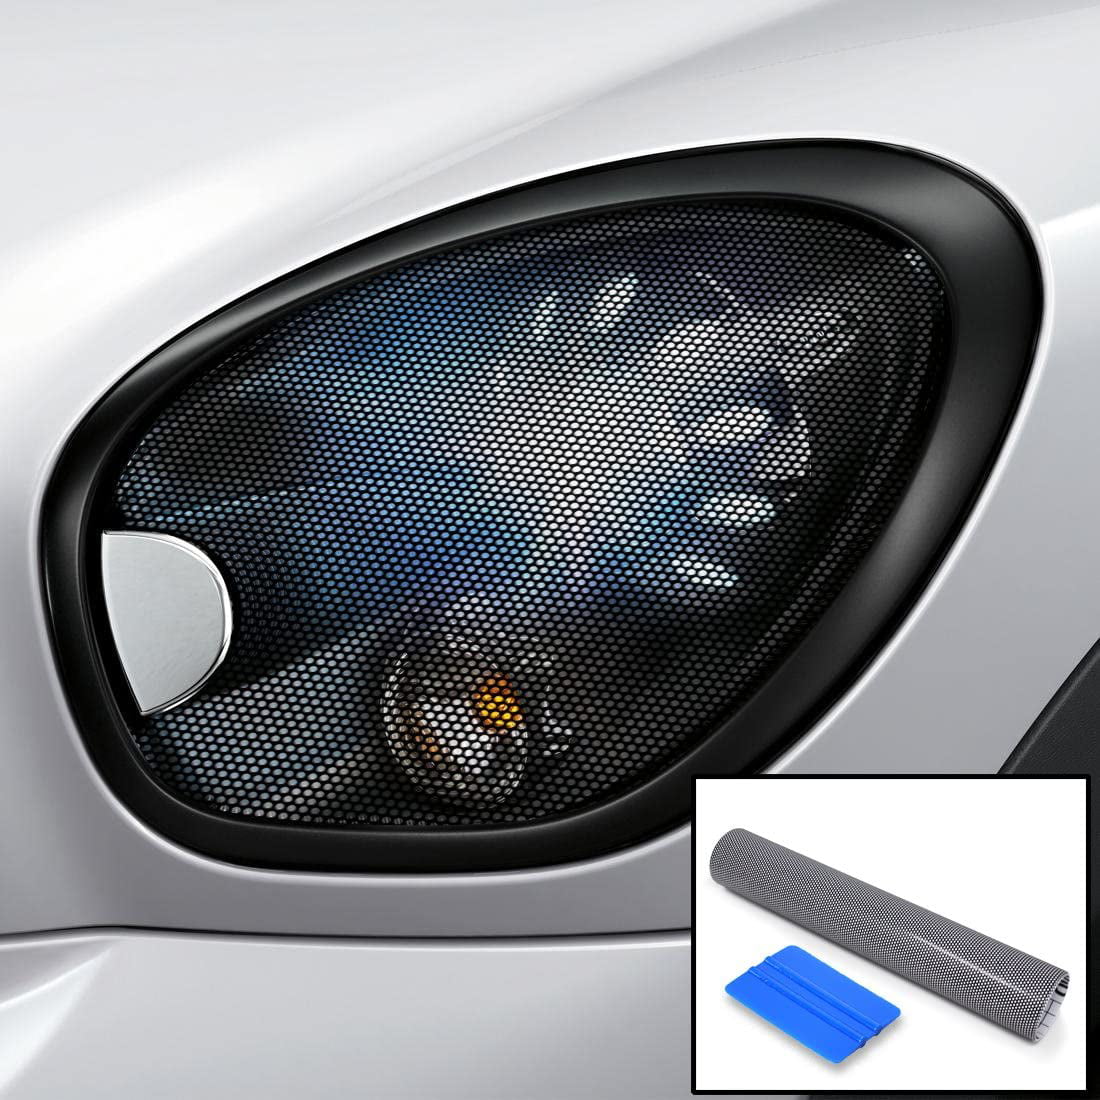 VViViD Black Perforated Headlight Cover Tint 17.9 x 72 Extra-Large Adhesive Vinyl Wrap Roll Including Blue Applicator Squeegee 